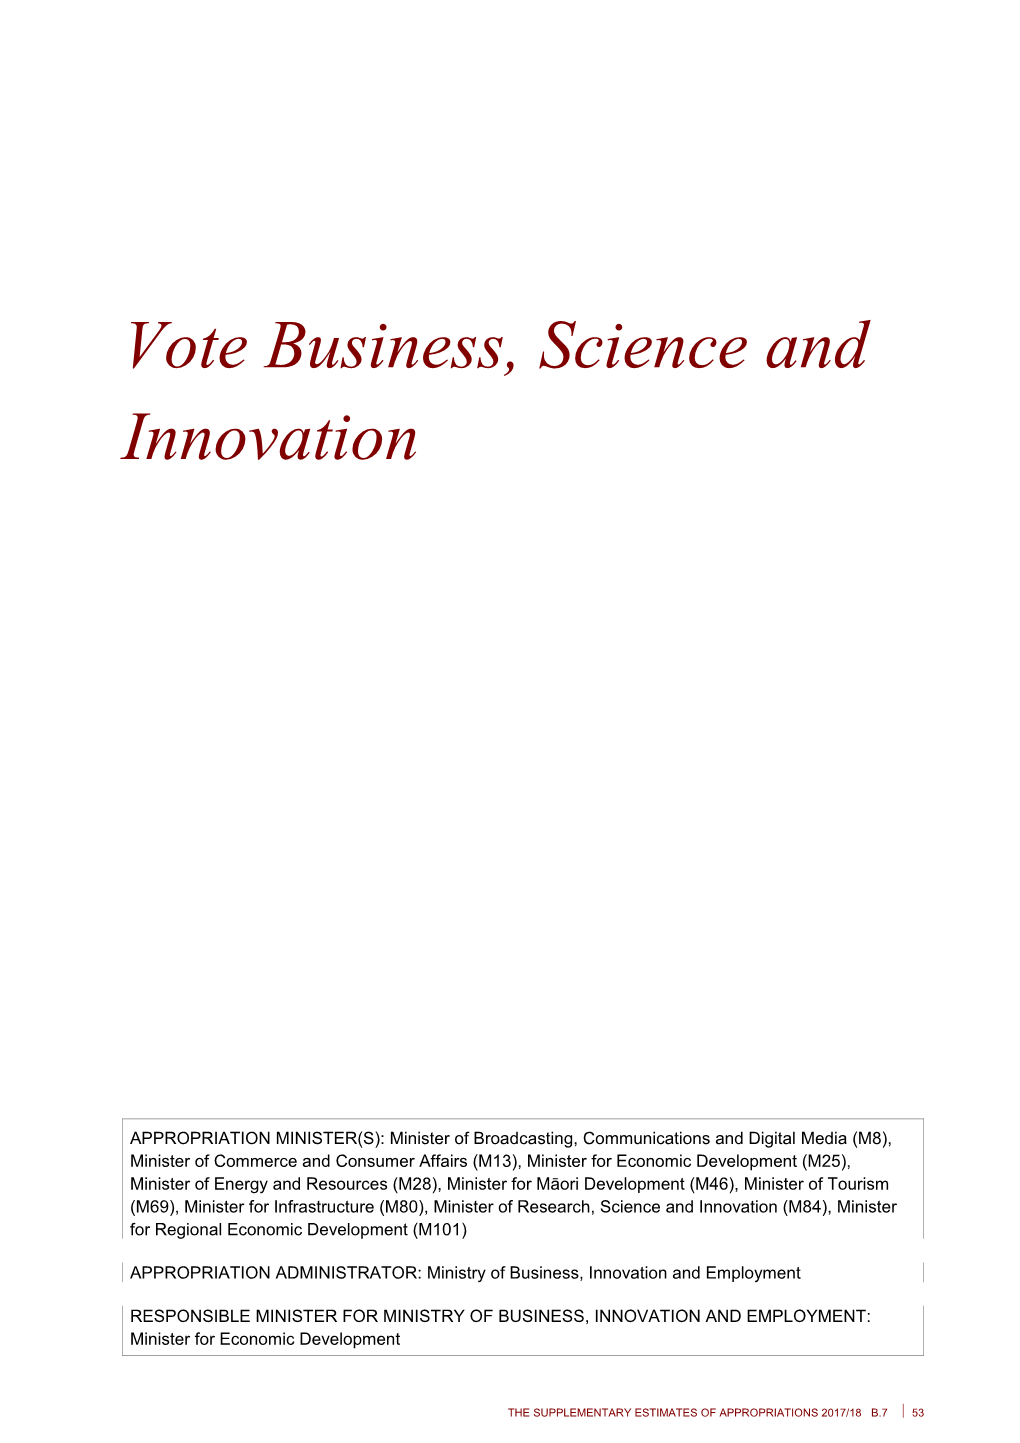 Vote Business, Science and Innovation - Supplementary Estimates 2017/18 - Budget 2018